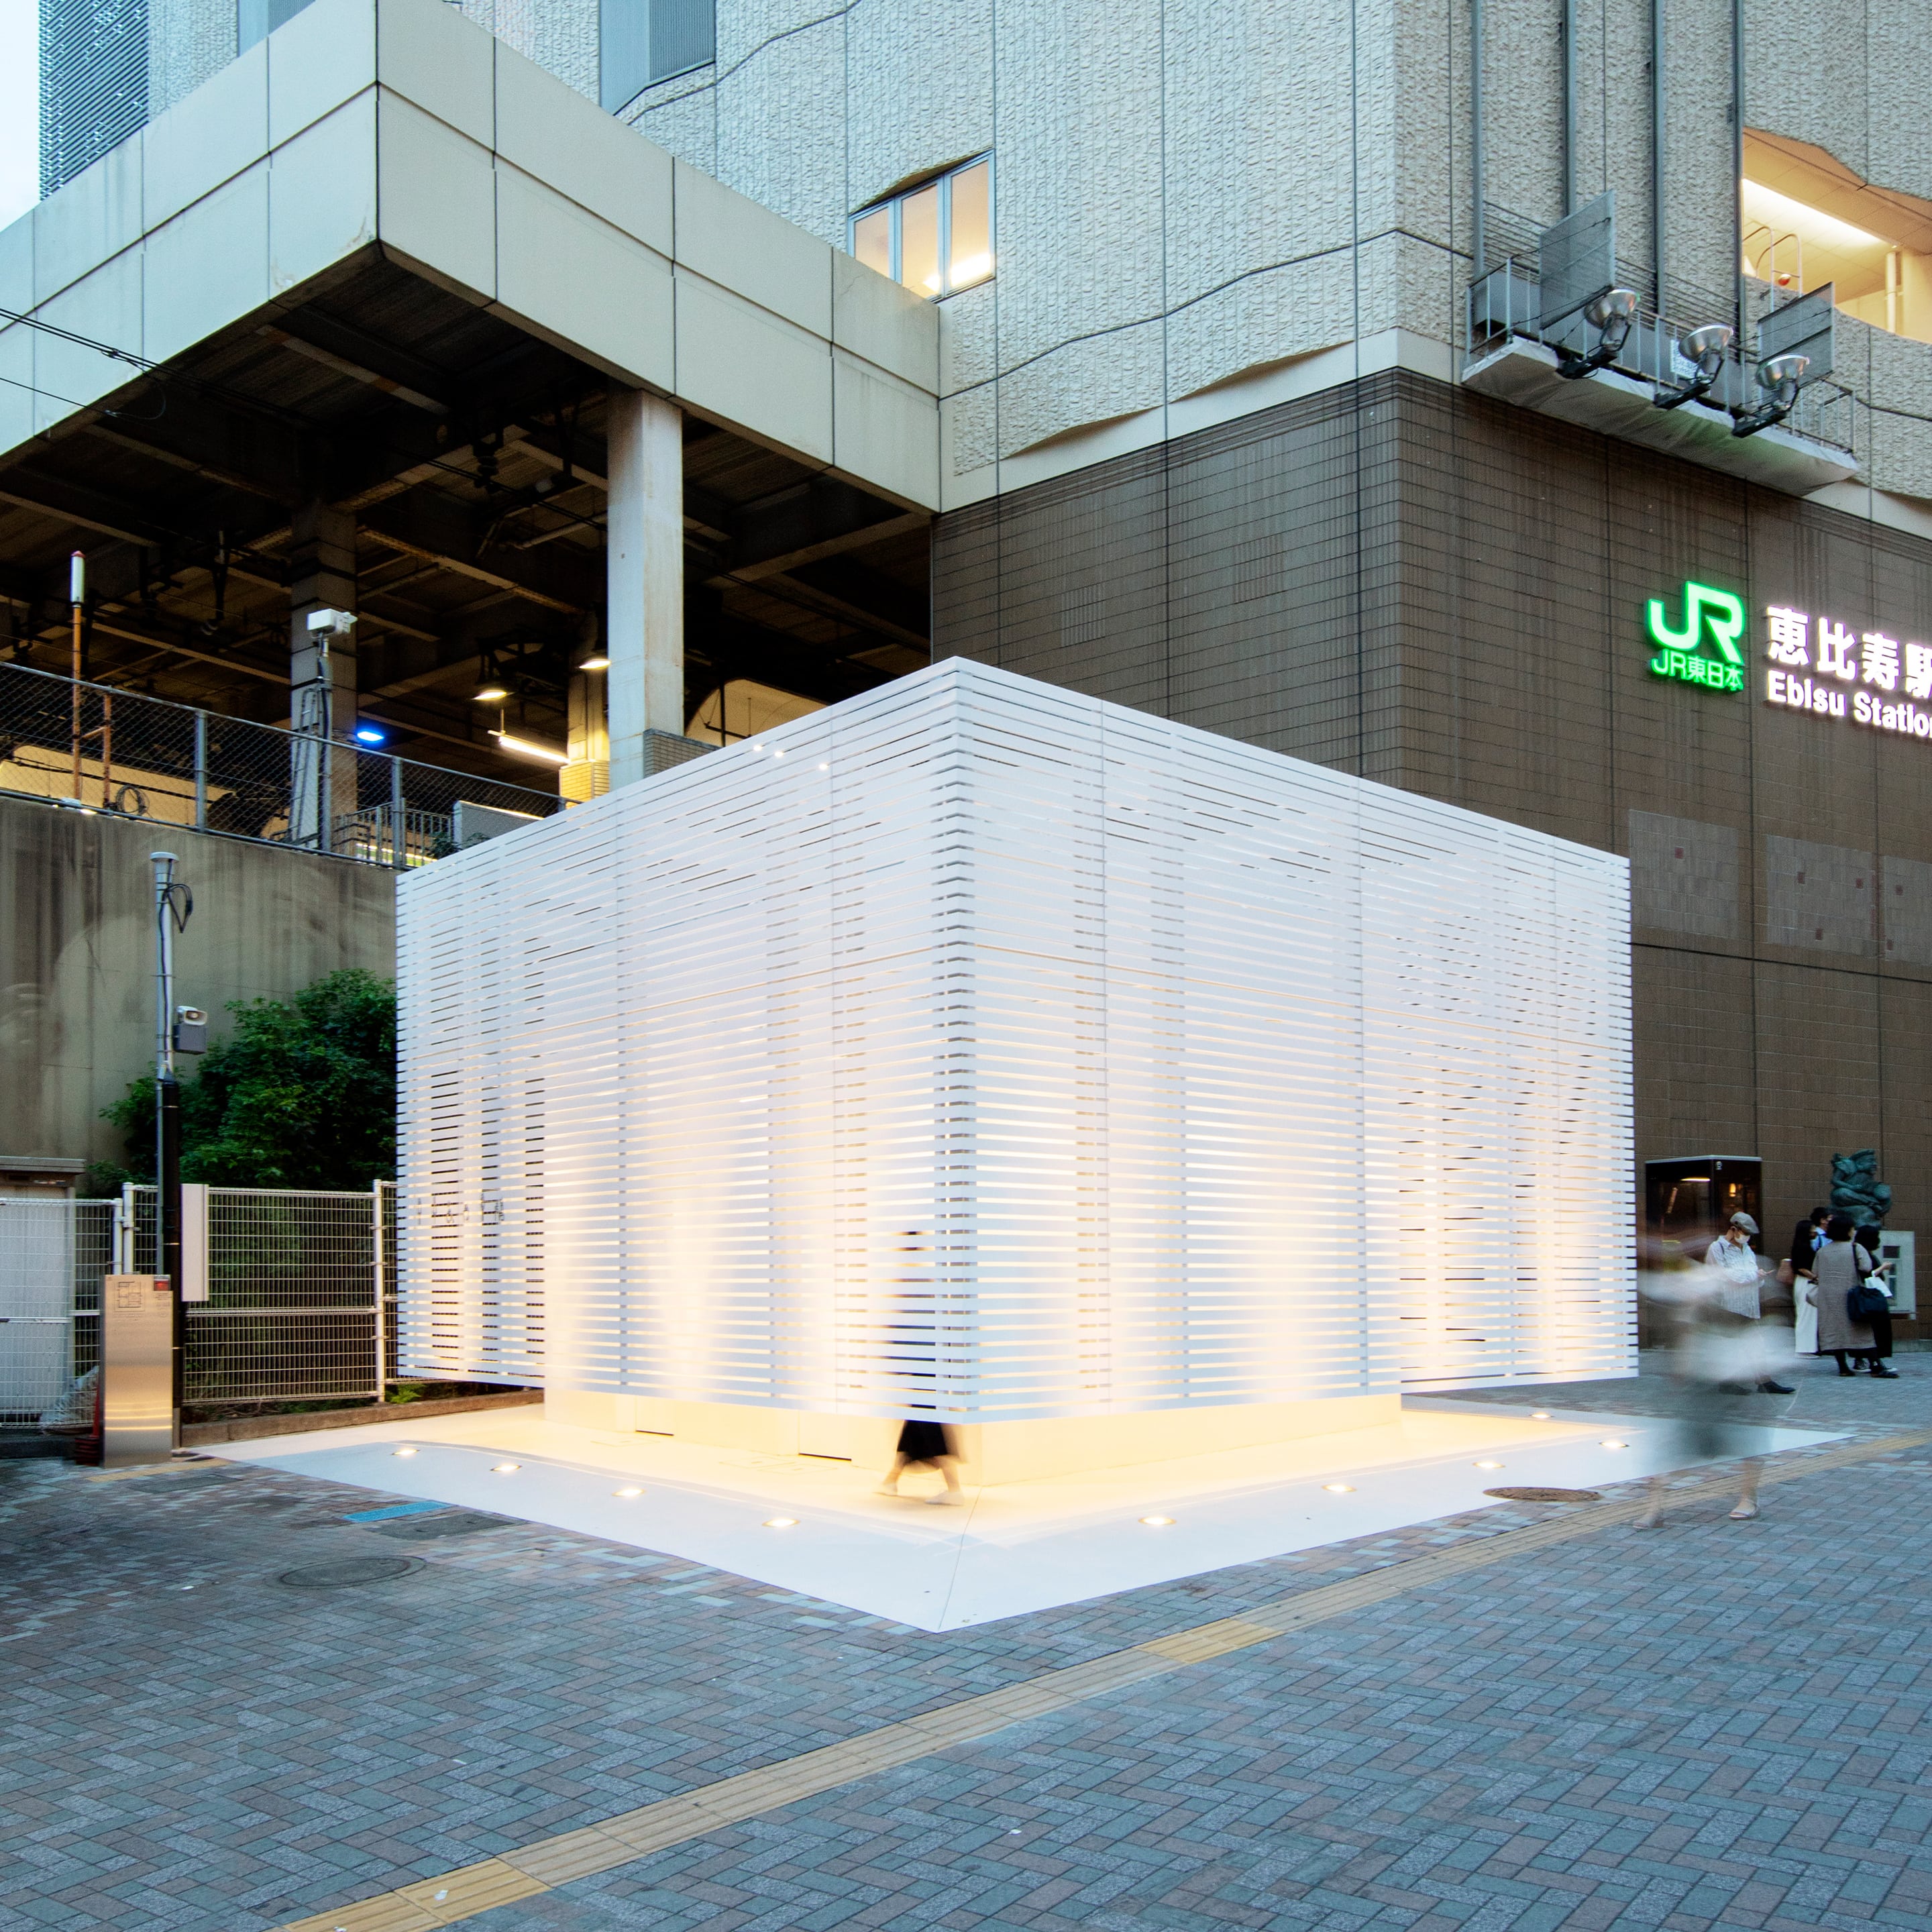 Far from Being Shabby and Sloven, The Tokyo Toilets are a Breakthrough for Clean White Public Facilities